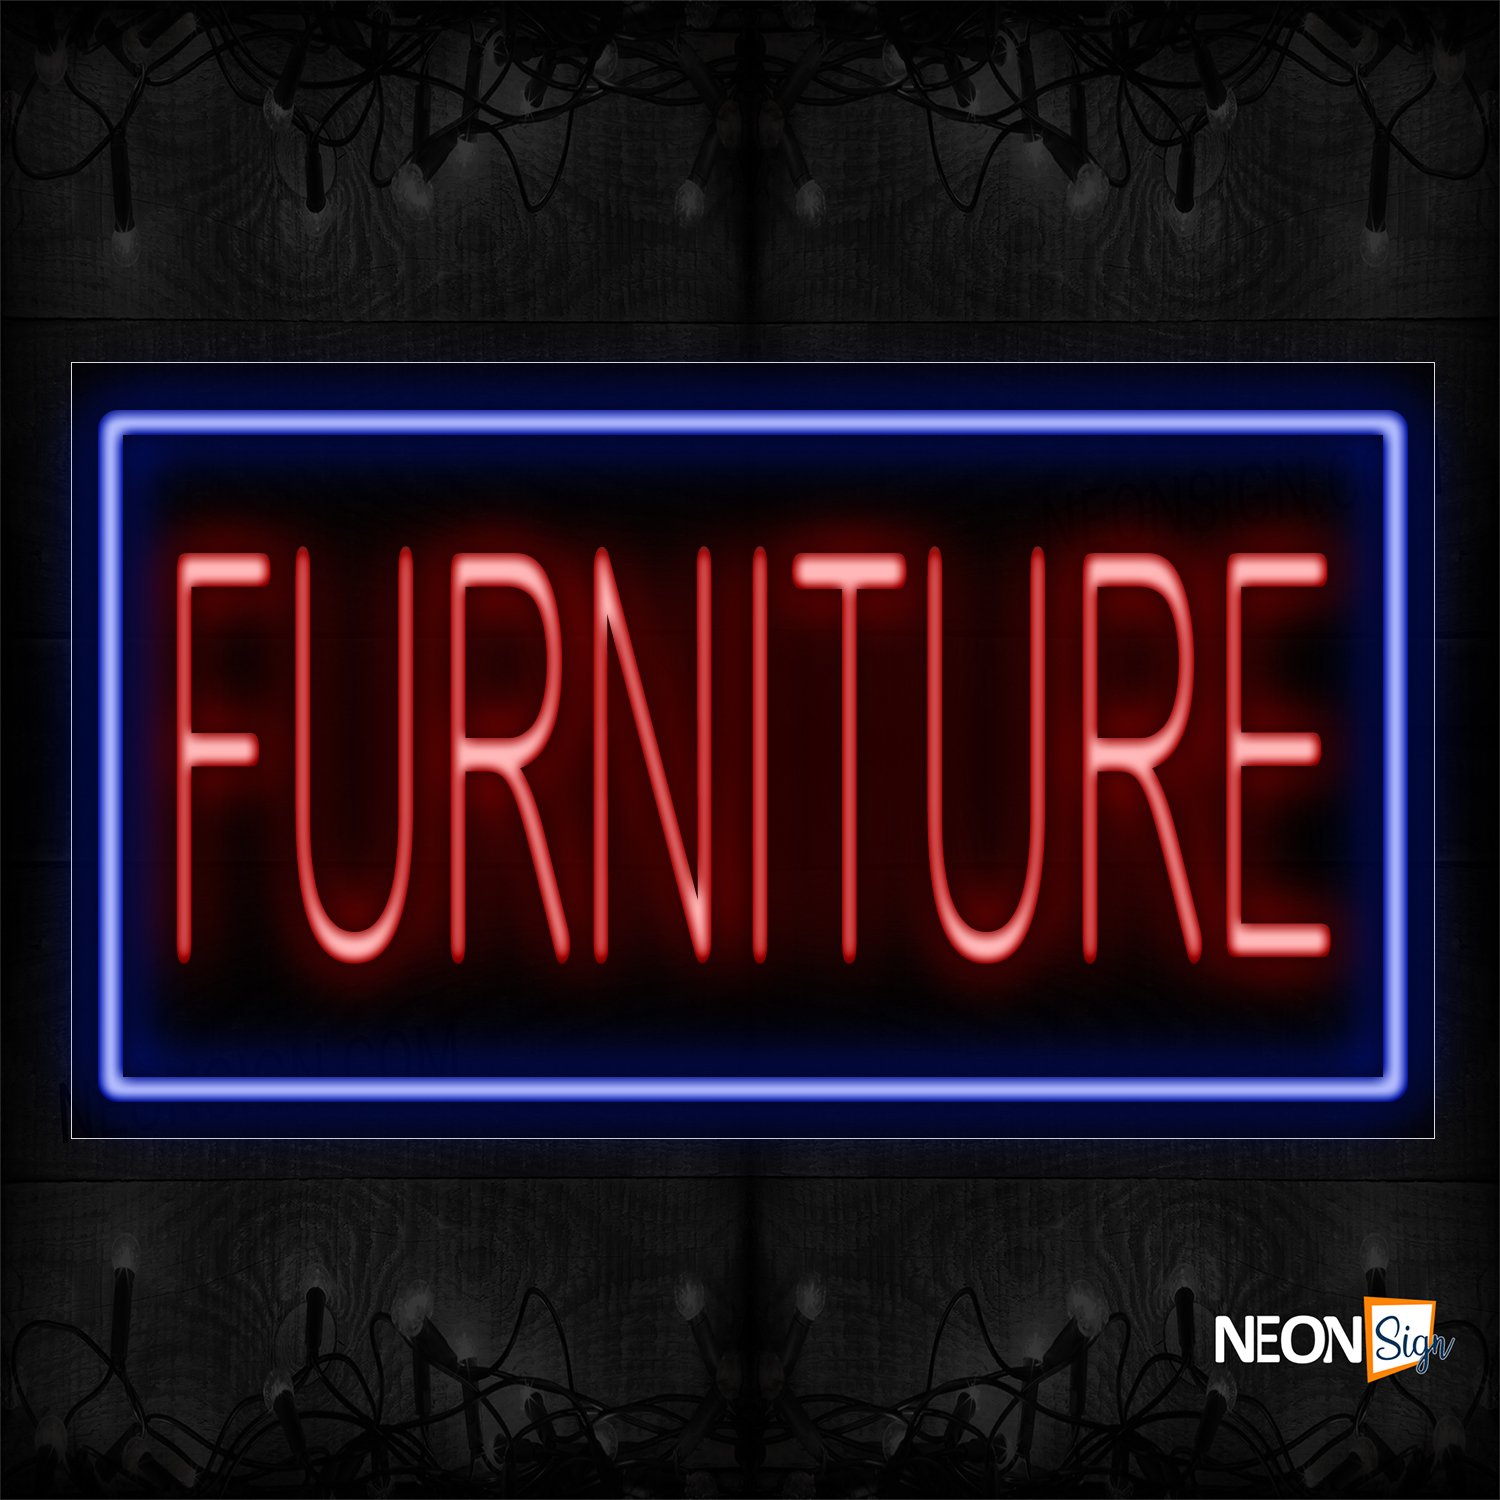 Image of 11076 Furniture With Border Neon Sign_20x37 Black Backing